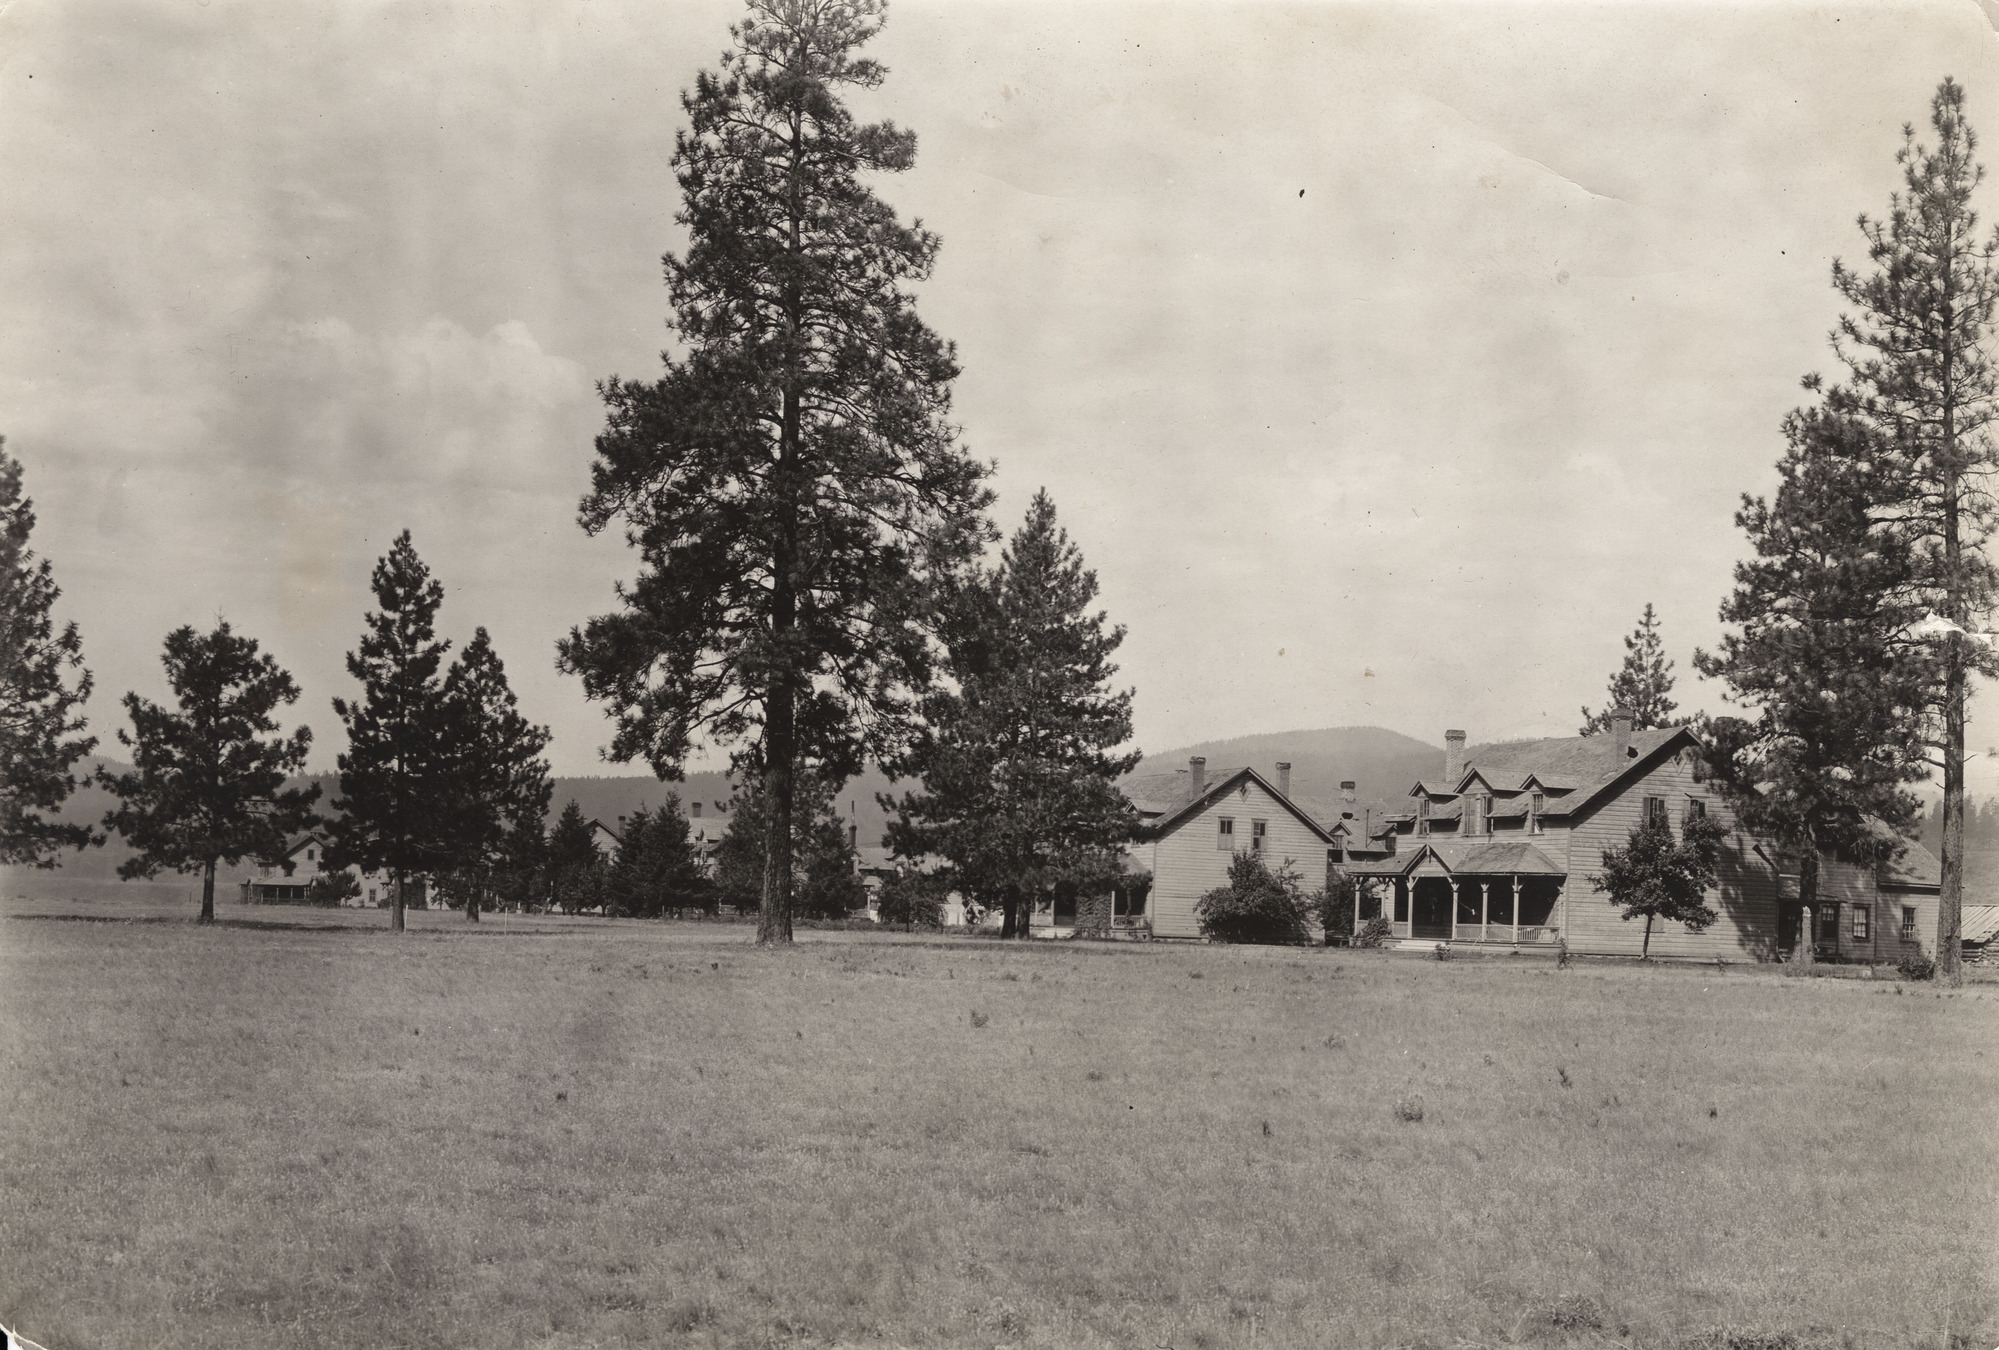 Black and white photograph of a field with trees and houses